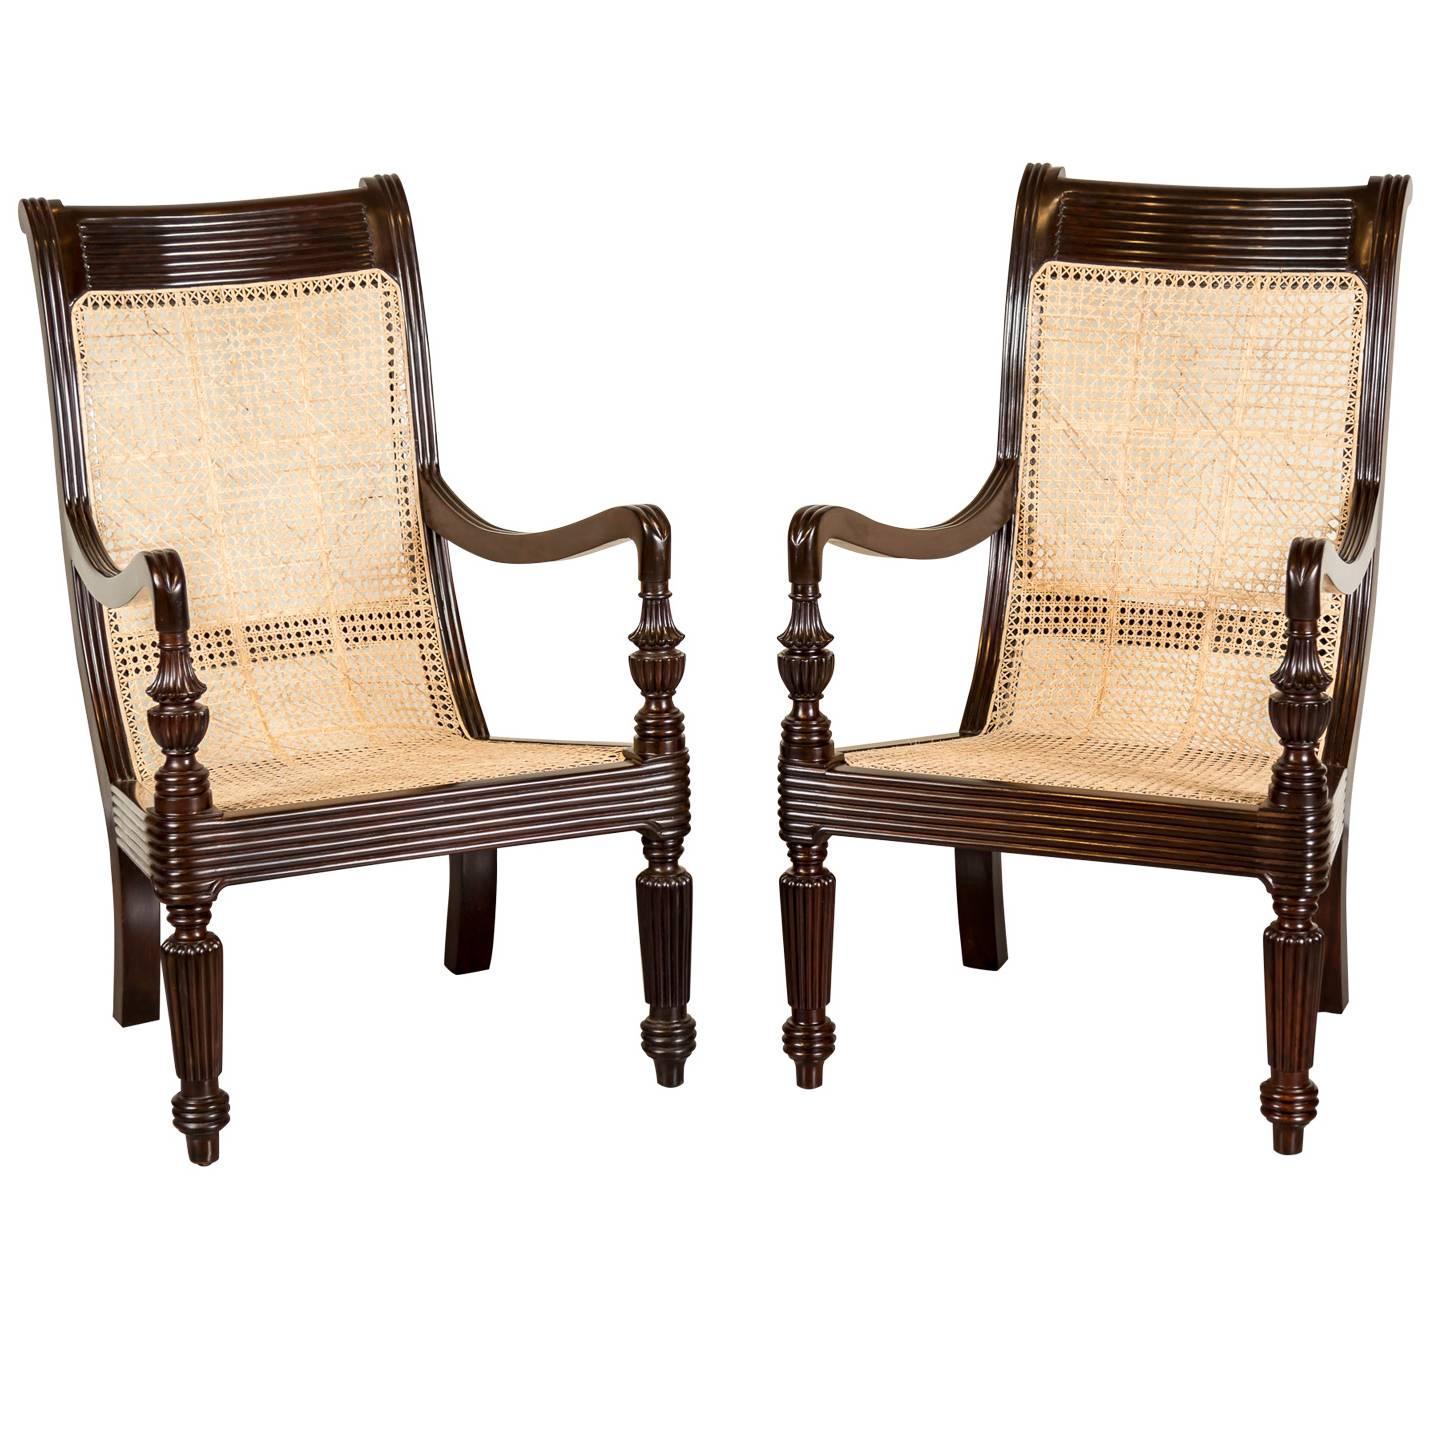 Pair of Anglo-Indian or British Colonial Rosewood and Cane Library Chairs